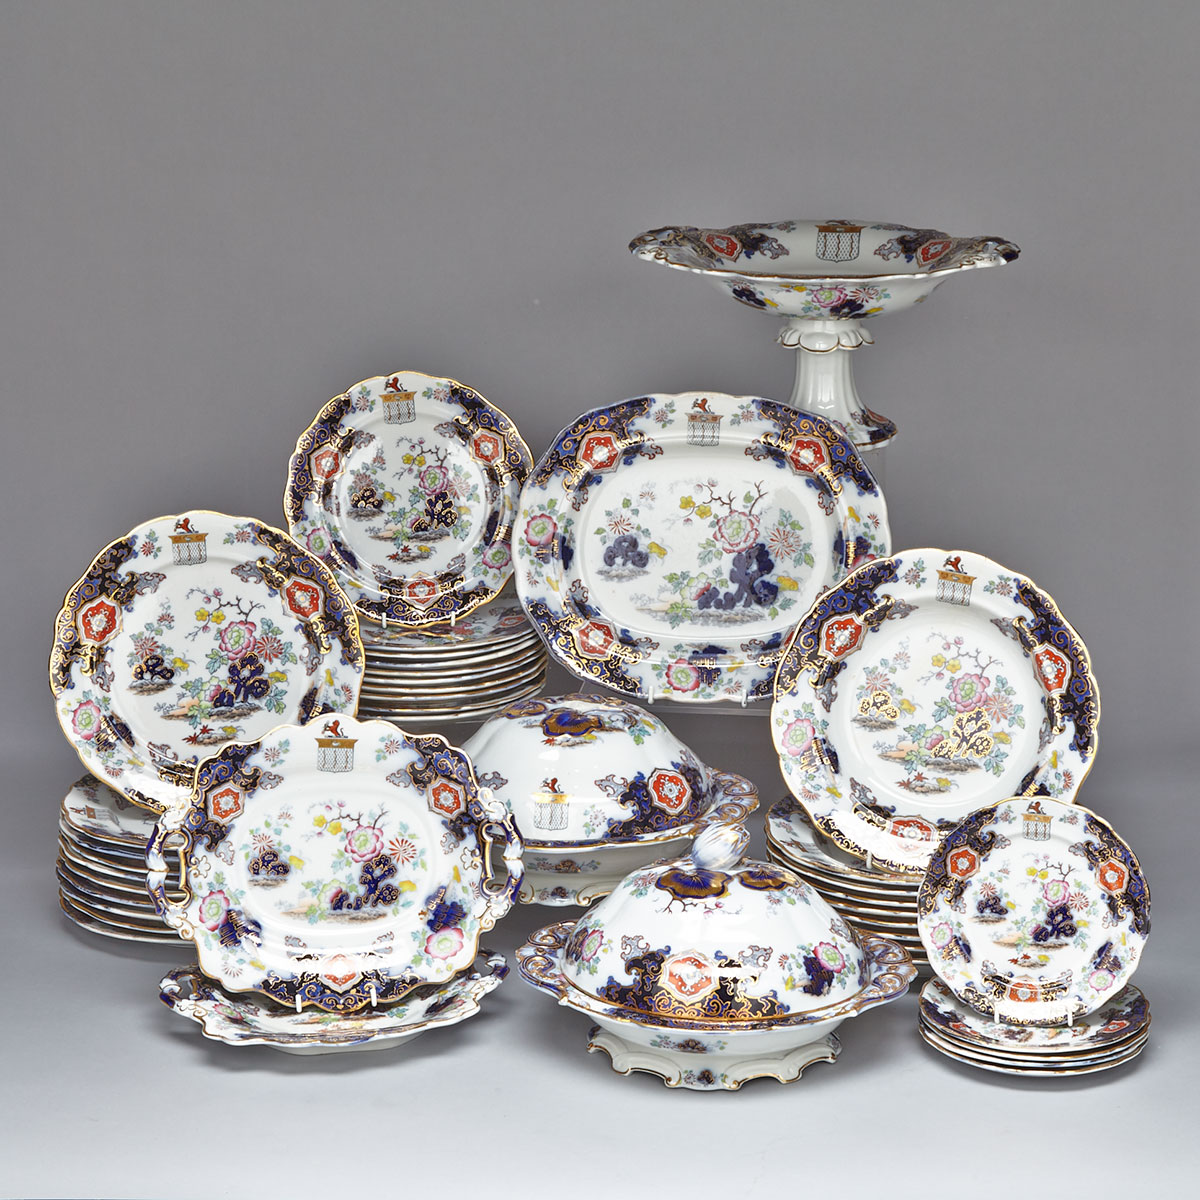 Ashworths ‘Real Ironstone China’ Armorial Service, 19th century